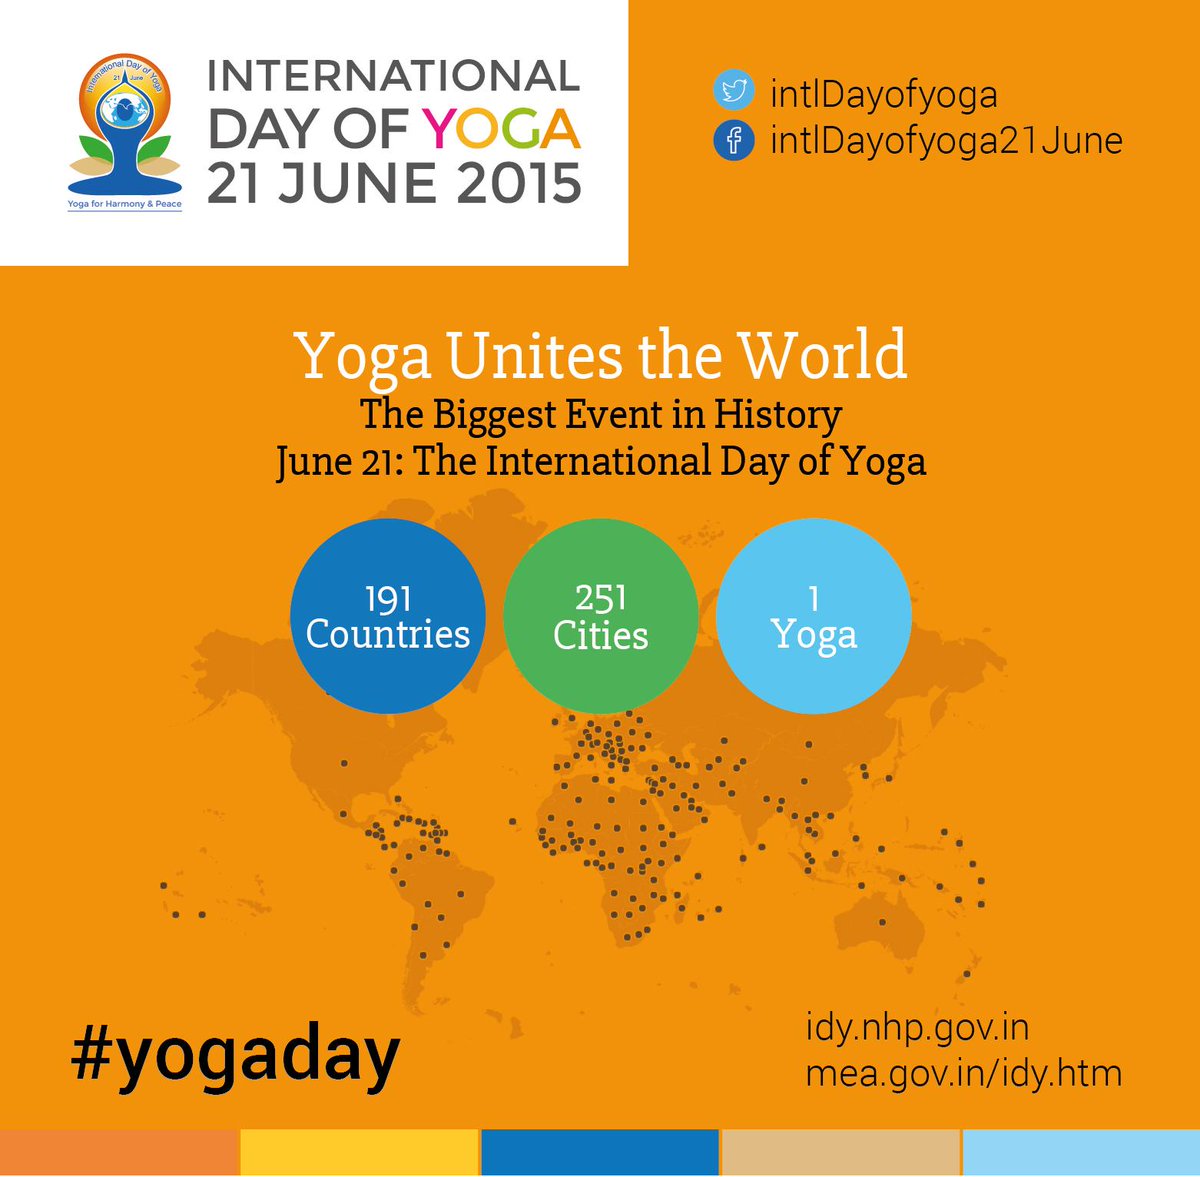 2 Billion ppl across the Globe performed #yoga in a span of 24 hours making #YogaDay the Biggest event in #HISTORY